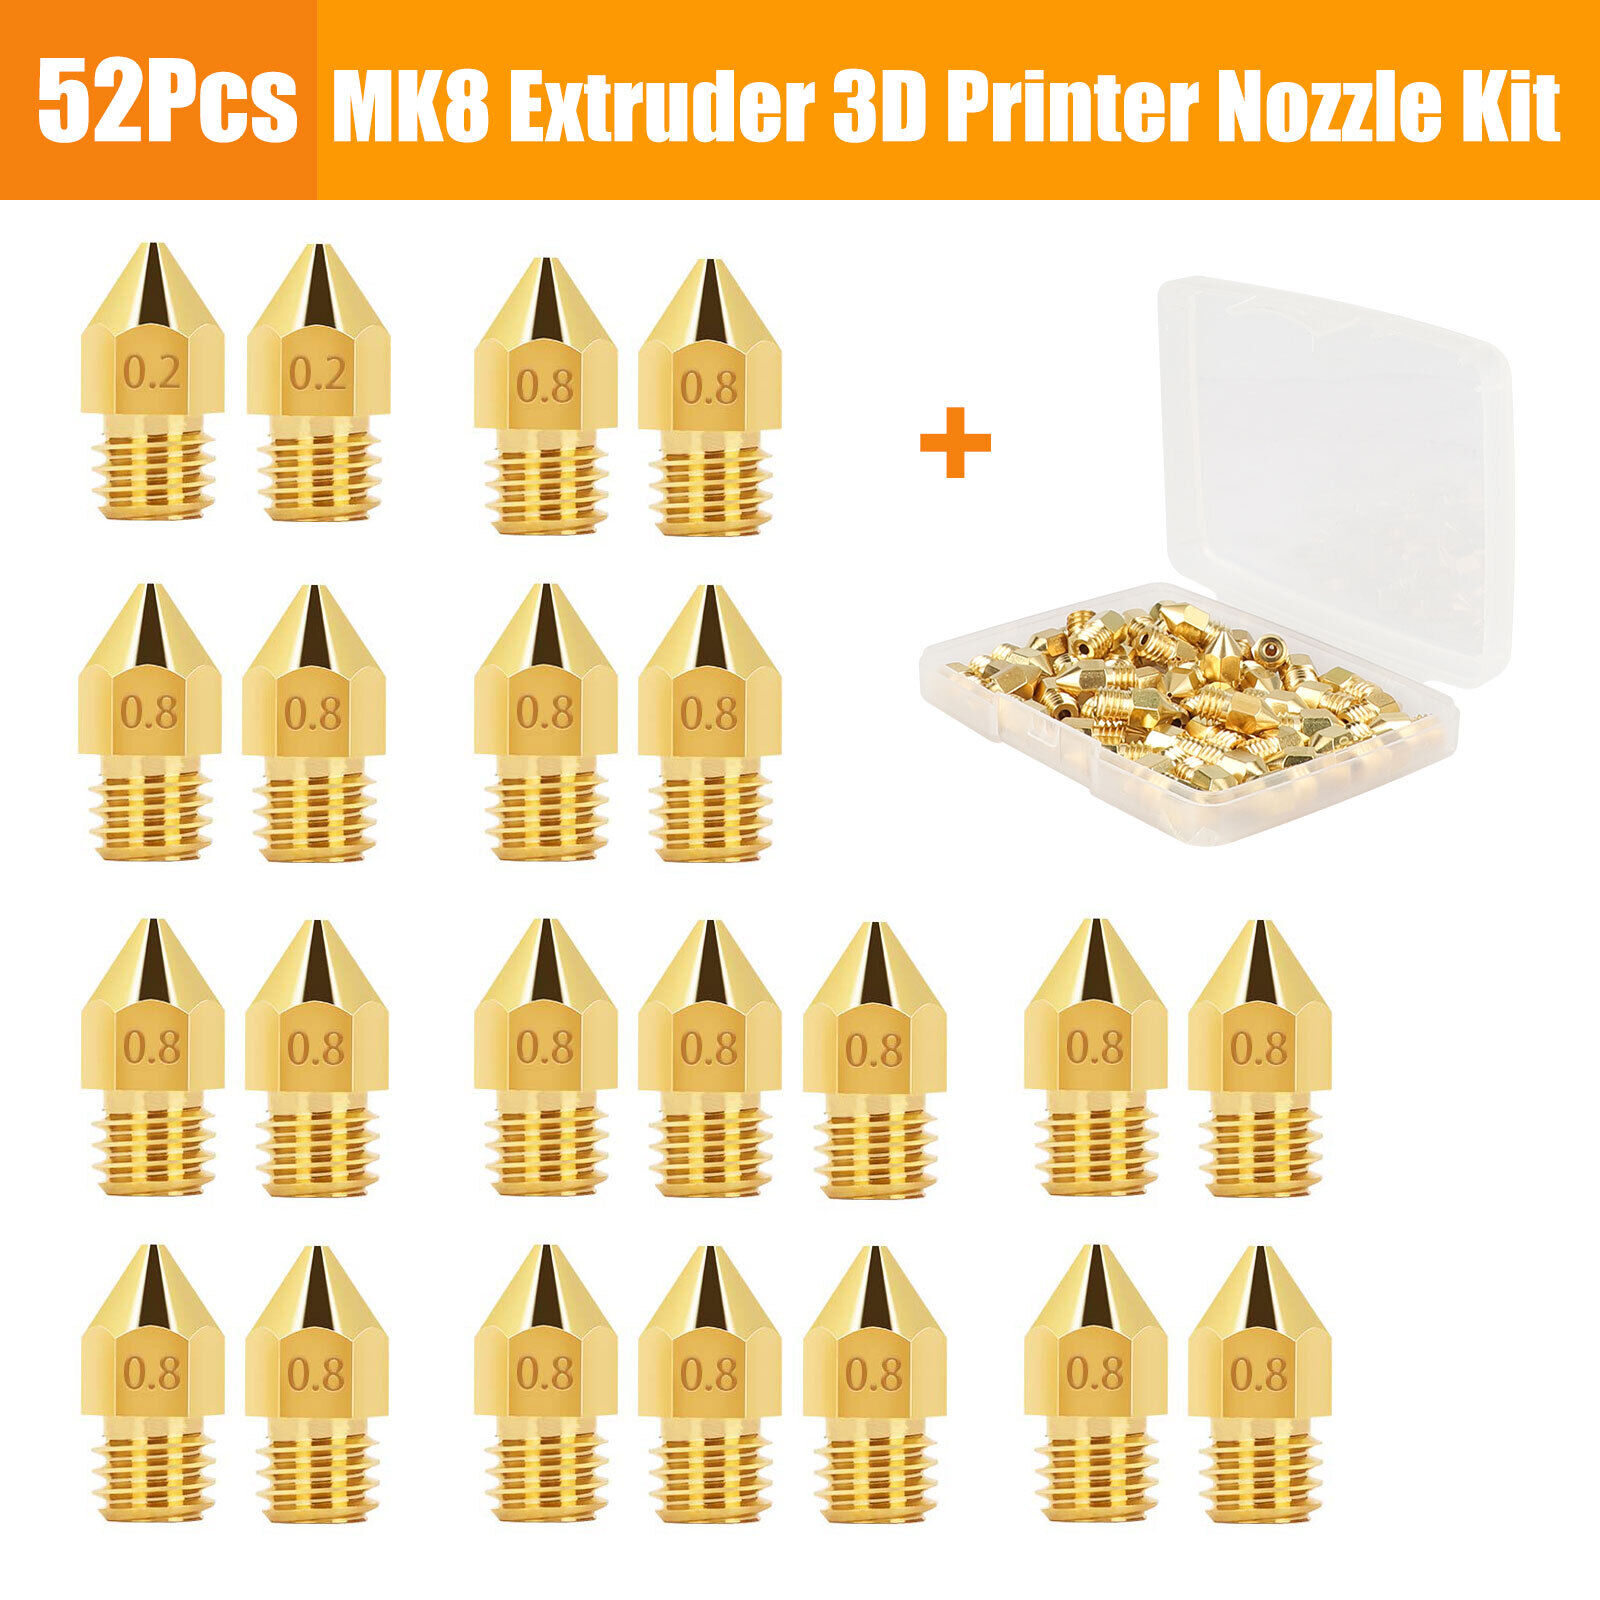 52Pcs MK8 Extruder 3D Printer Nozzle Kit 0.2mm-1.0mm for Makerbot Creality CR-10